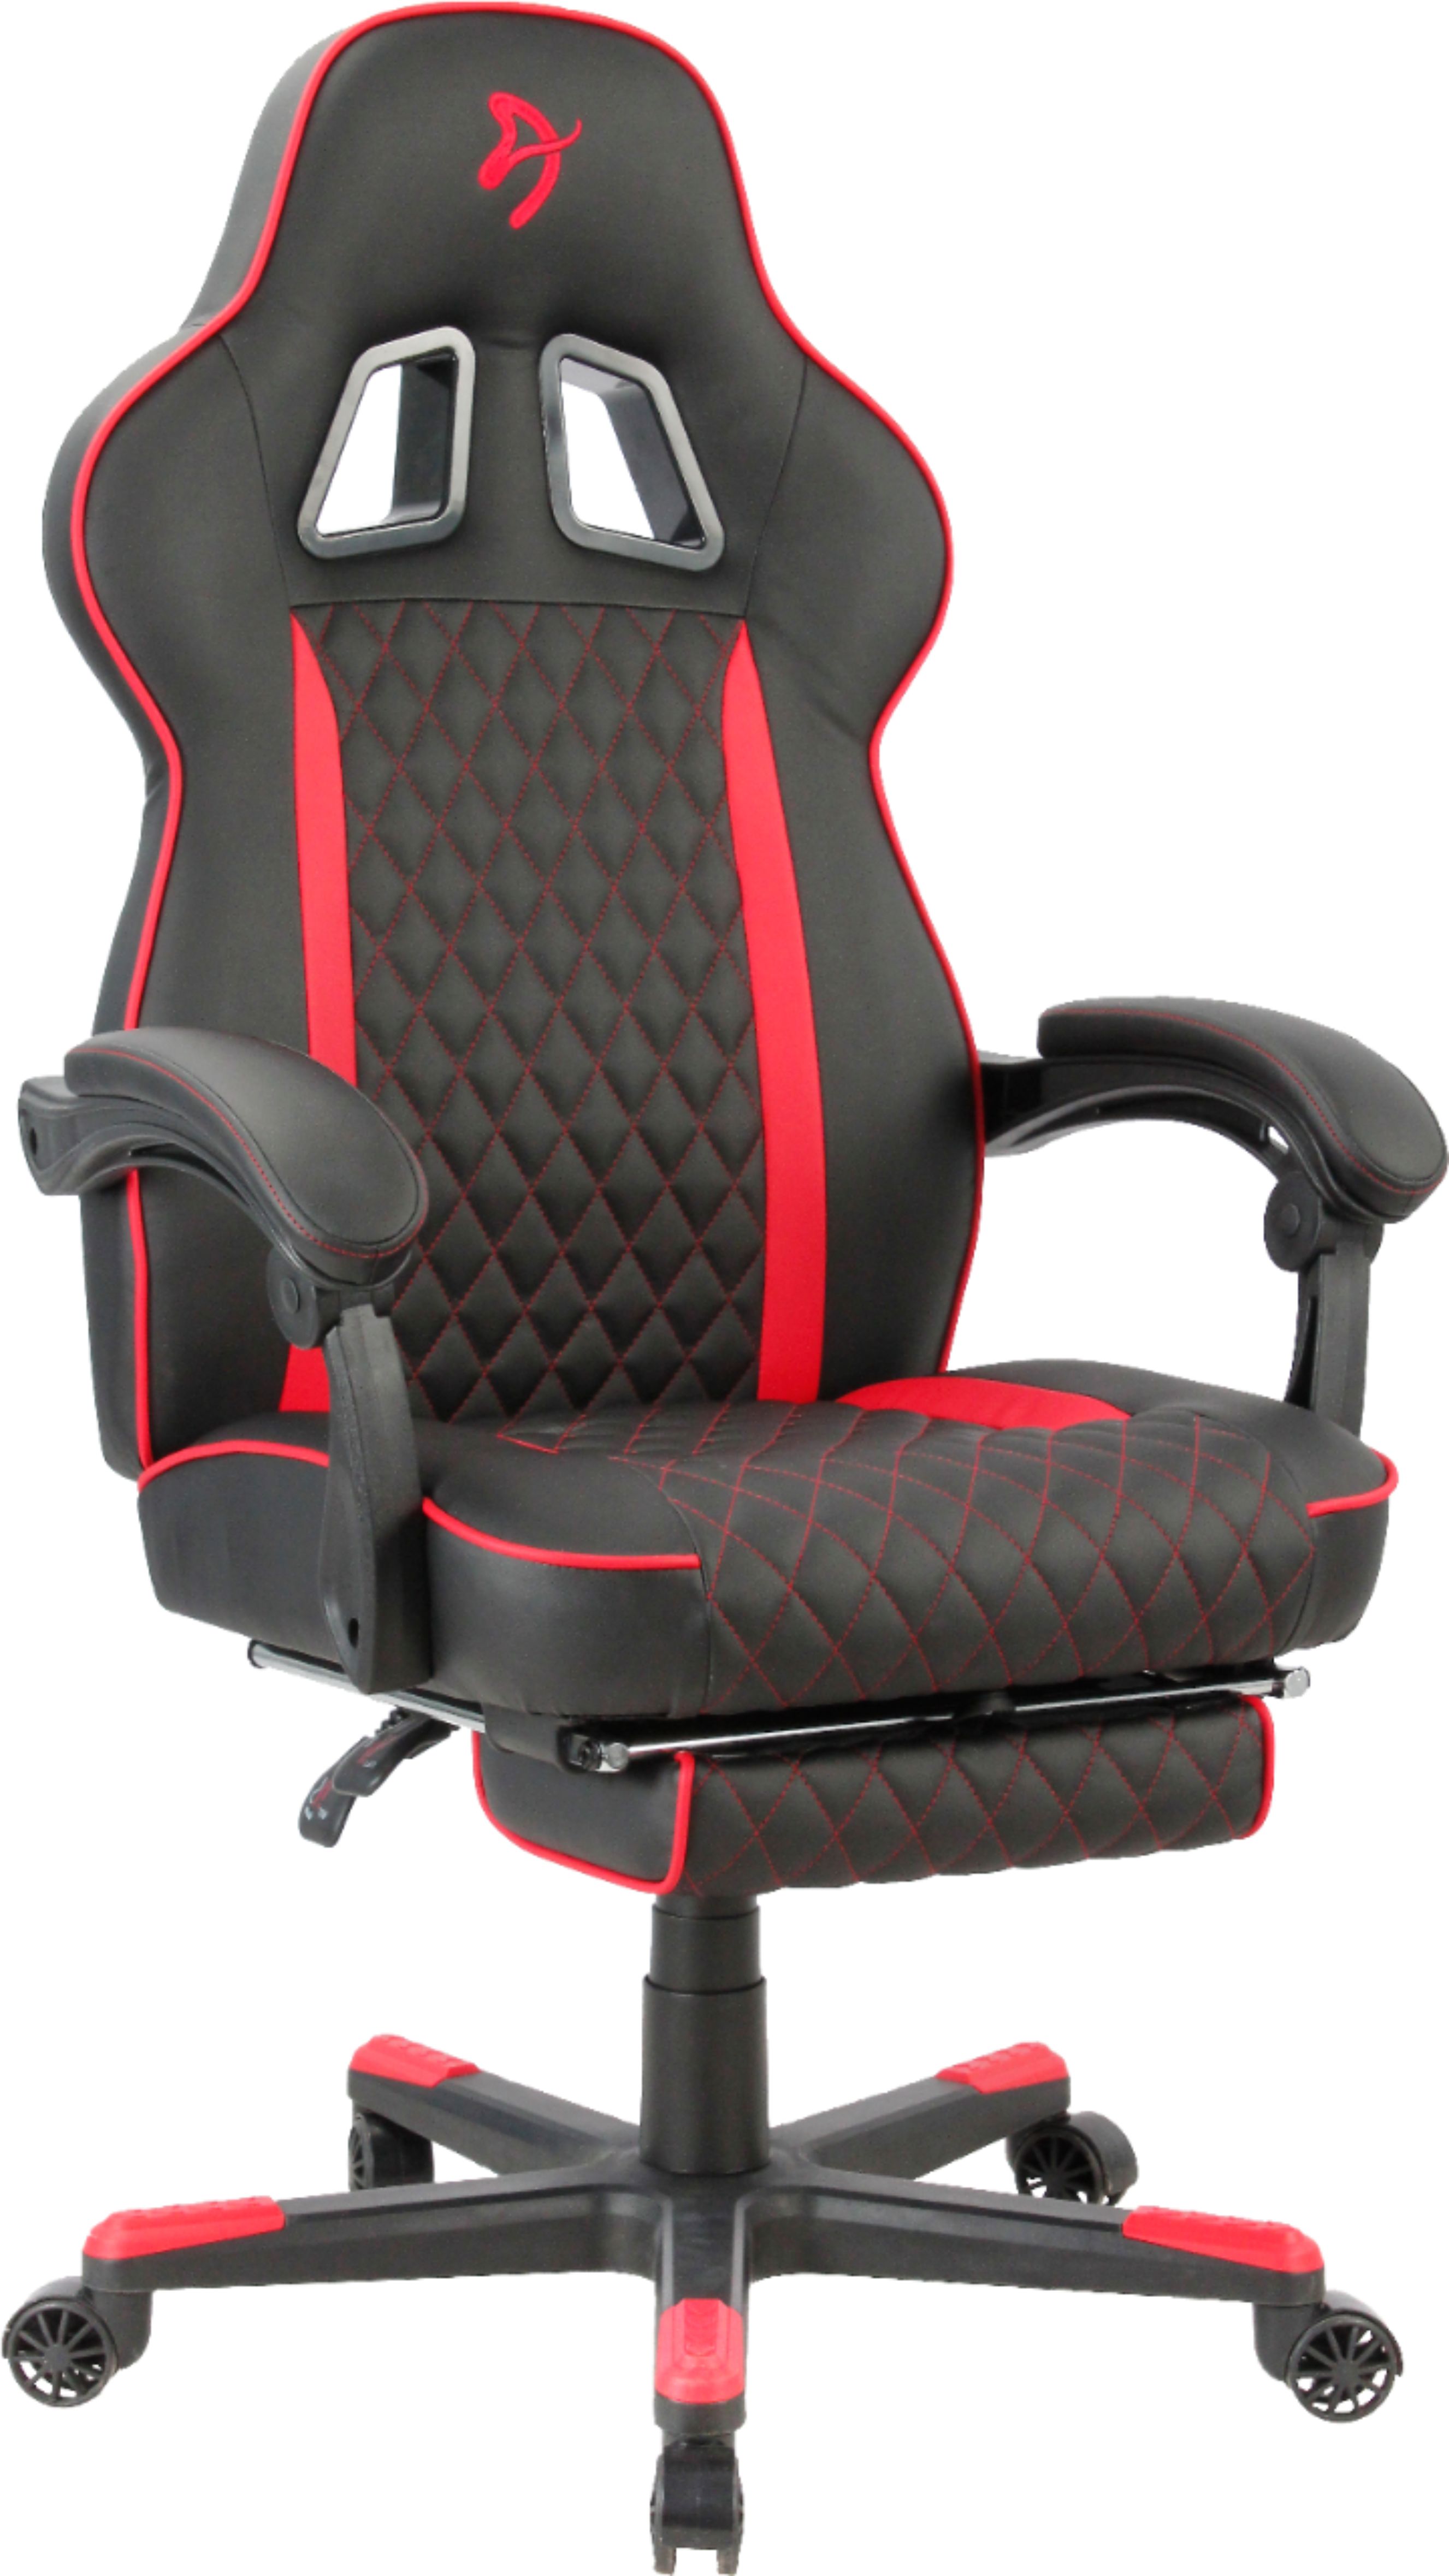 Angle View: Arozzi - Primo Premium Woven Fabric Gaming/Office Chair - Dark Grey with Red Accents